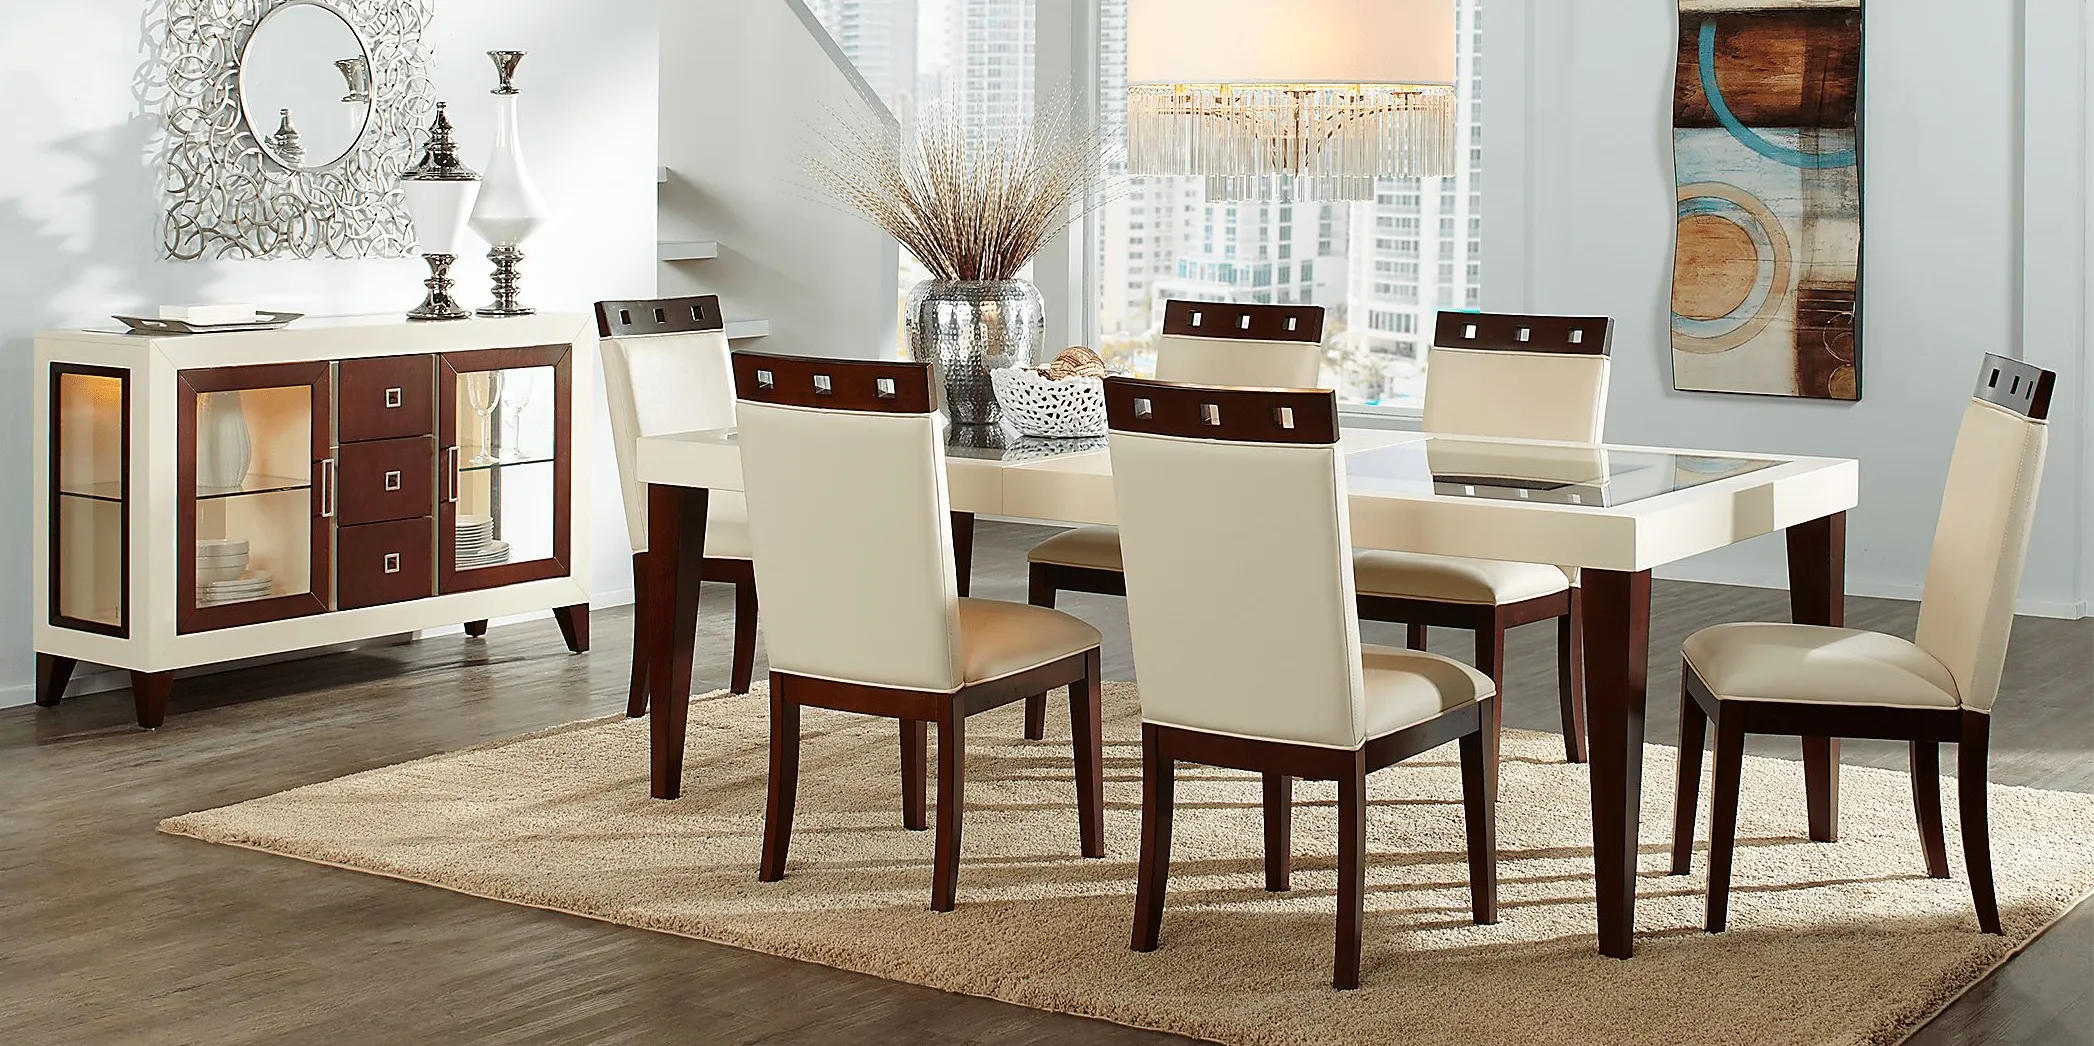 Savona Ivory 5 Pc Rectangle Dining Room with Wood Top Chairs